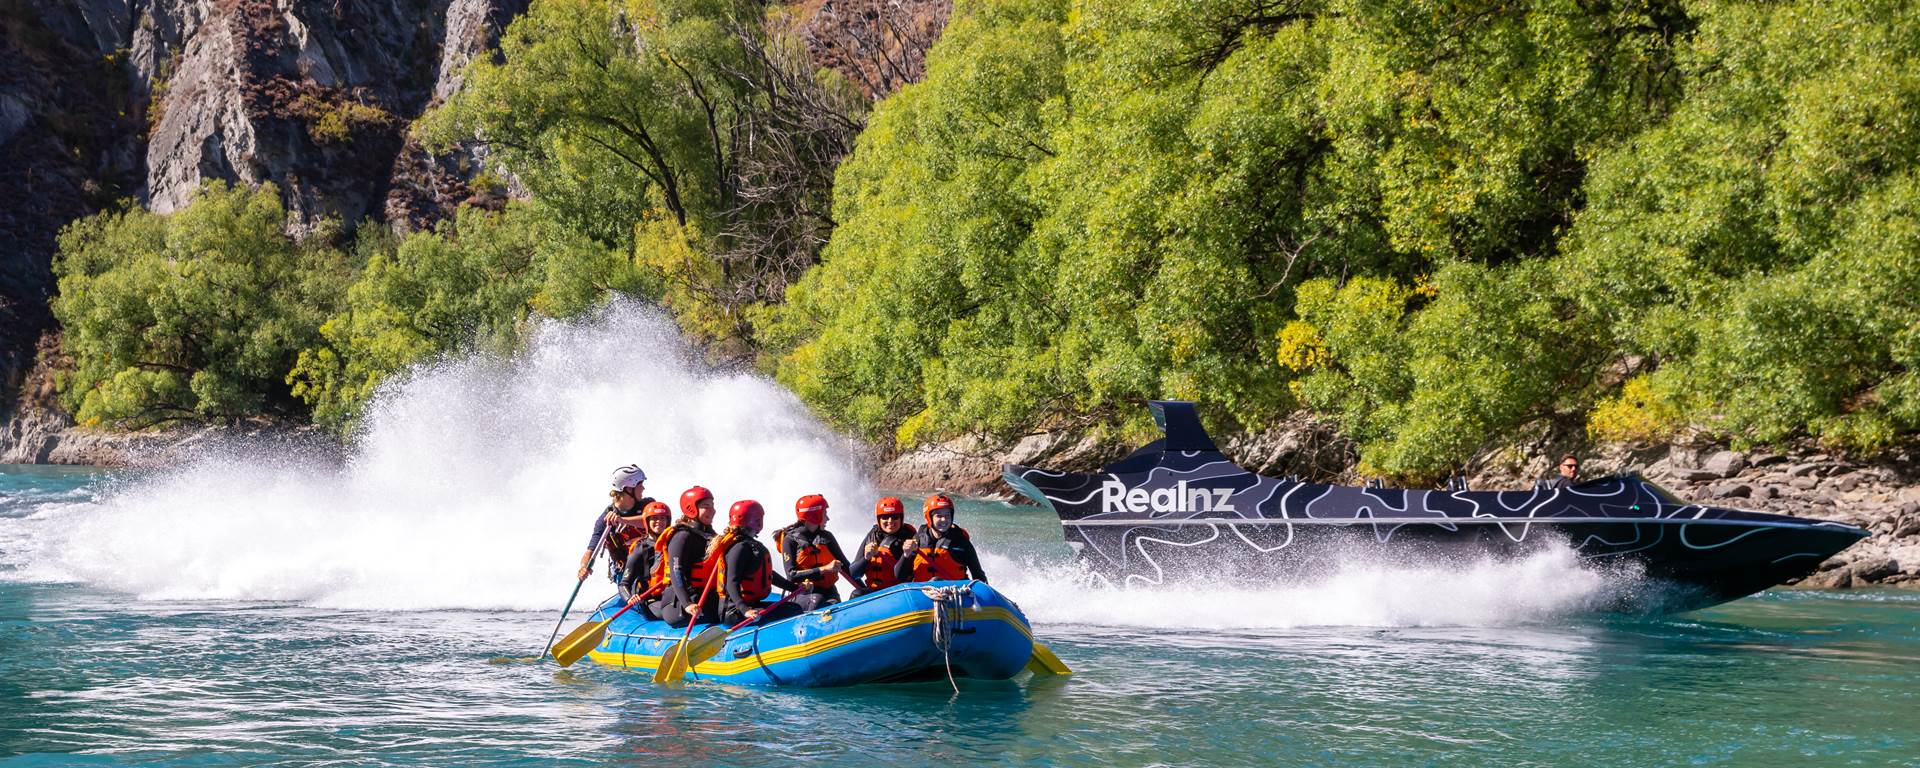 Rafting and Jet Boating on the Shotover River